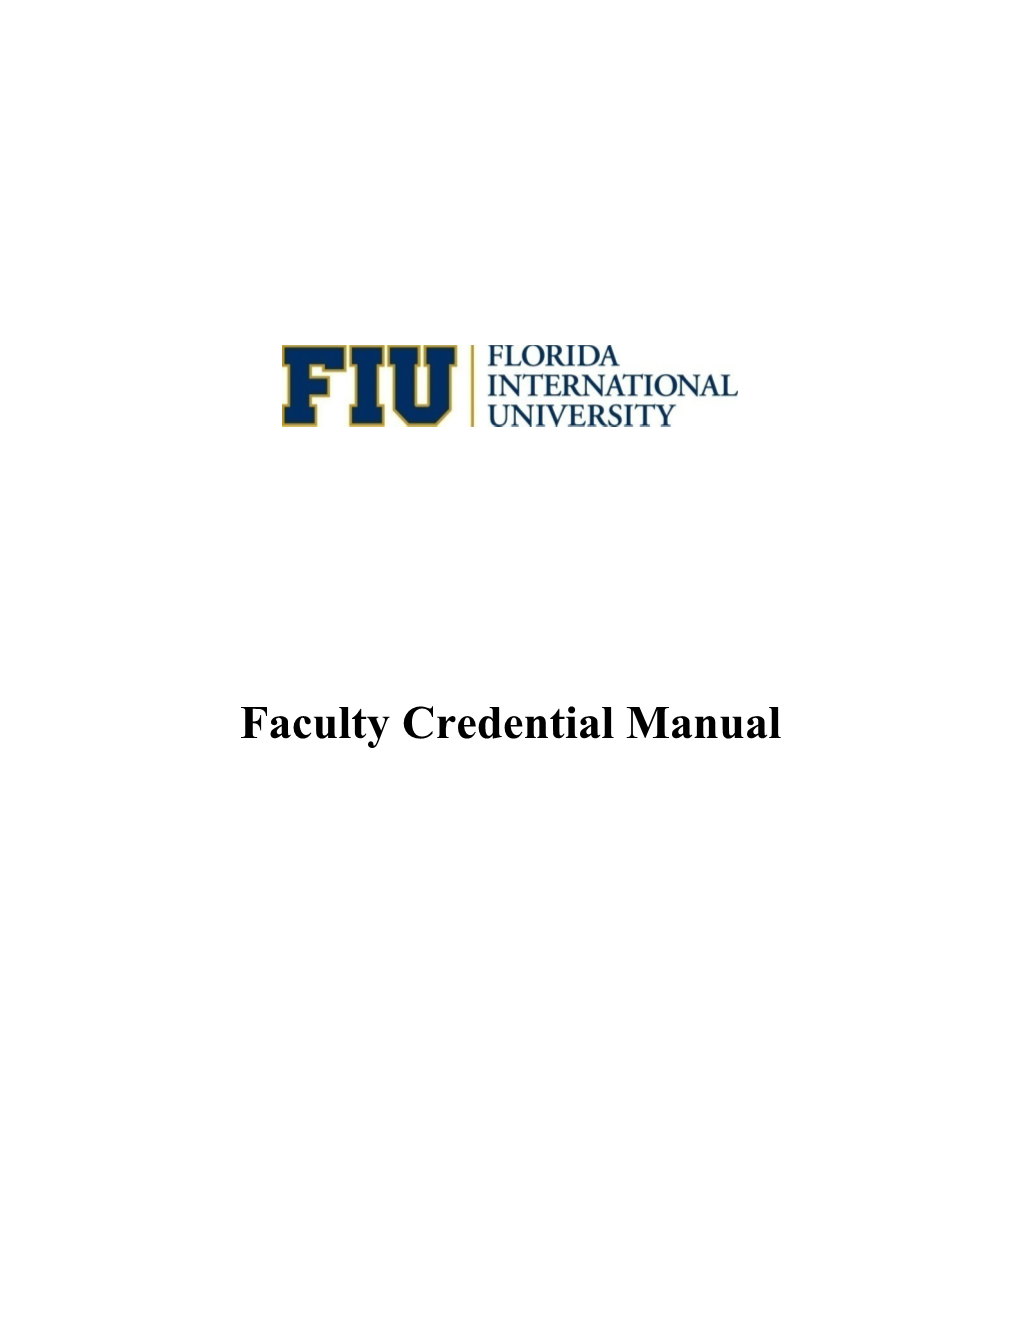 Faculty Credential Manual